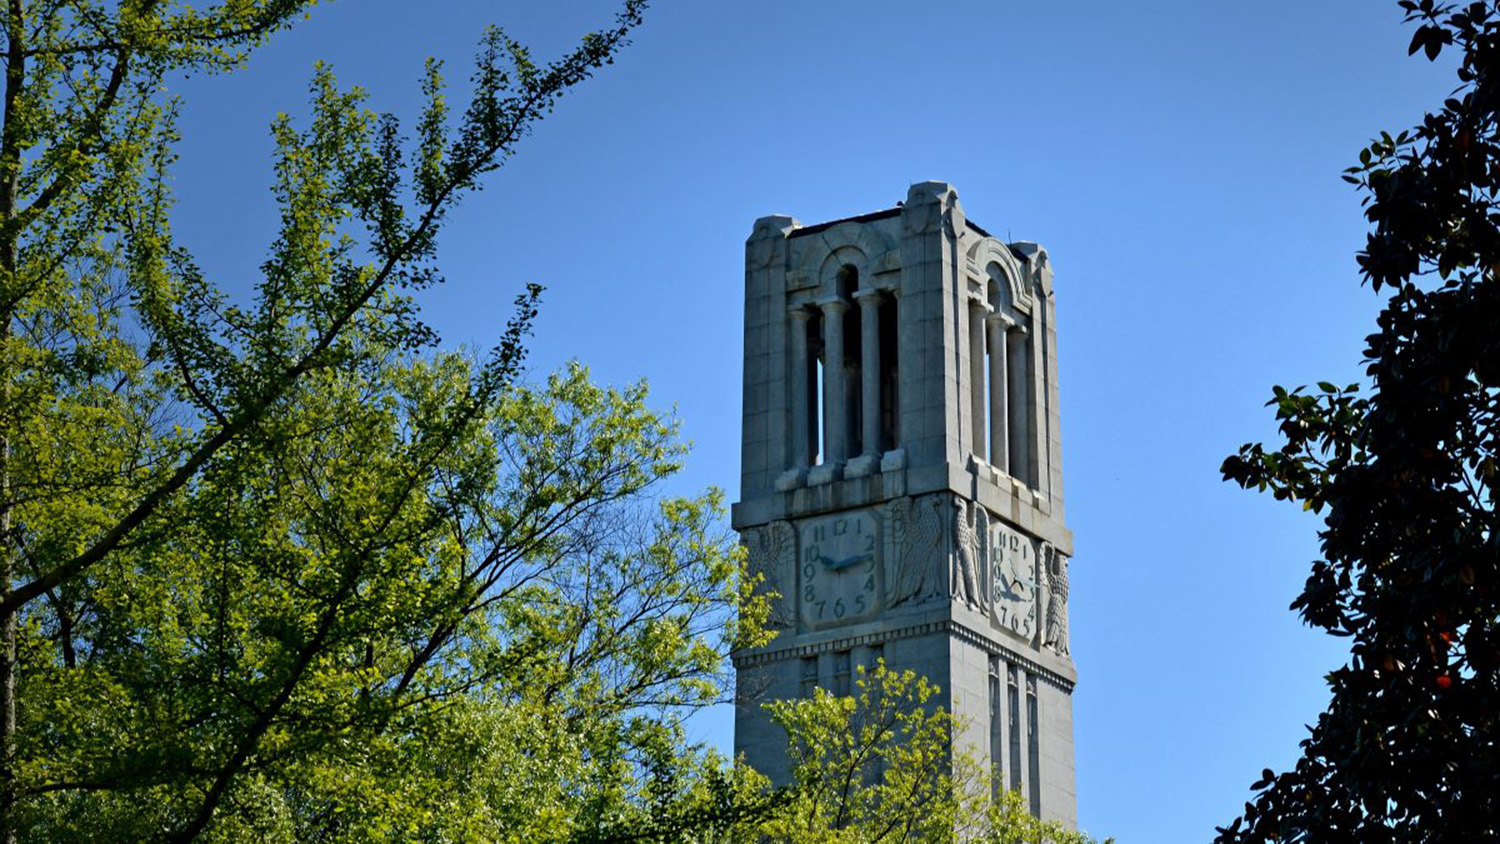 NC State's belltower in spring